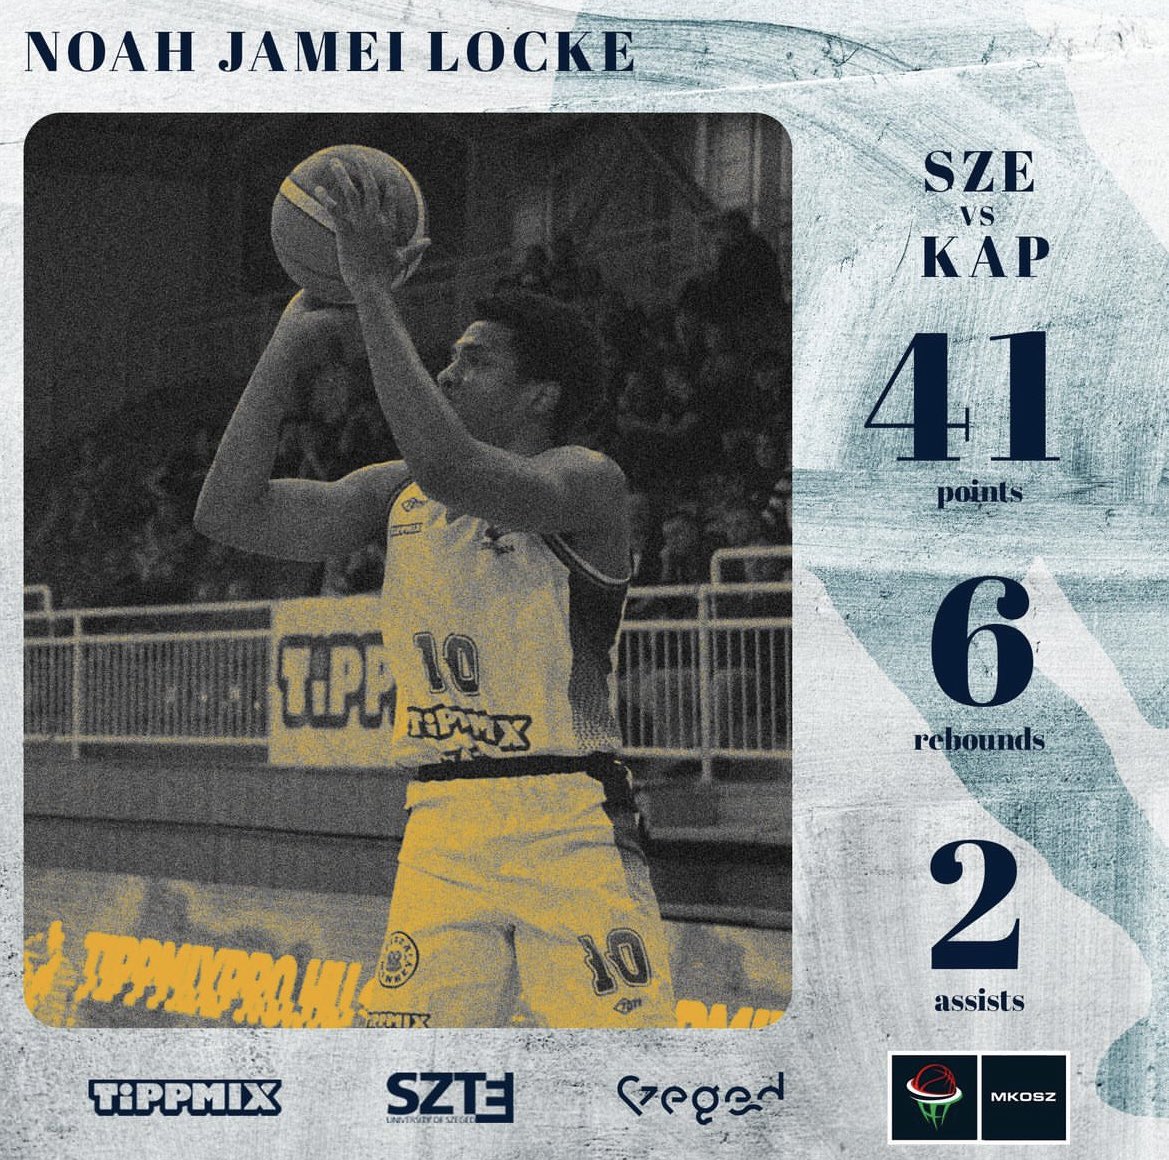 Patience & Confidence. Noah is continuing to go parabolic in Hungary (Szedeák) 44, 41 and 41…and stacking!! @_NoahLocke